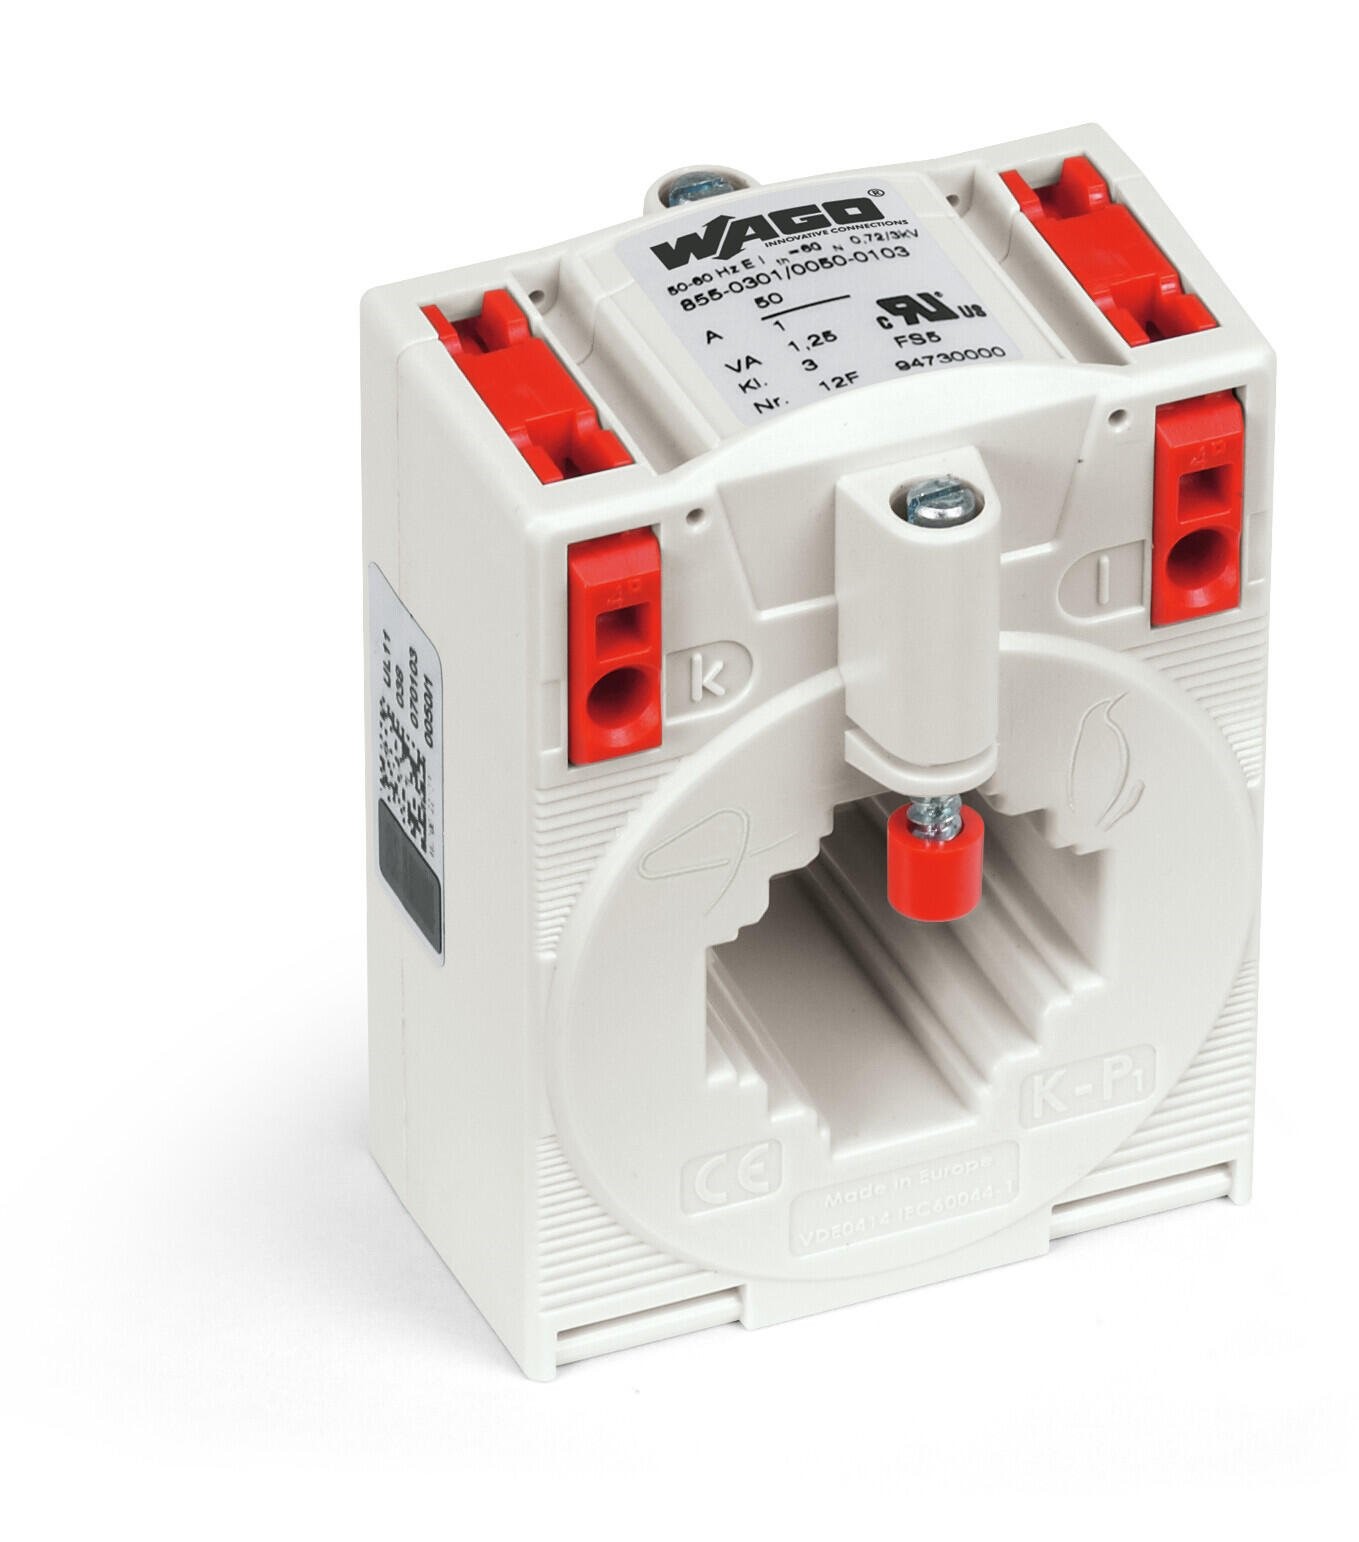 WAGO Current Transformers and Voltage Taps